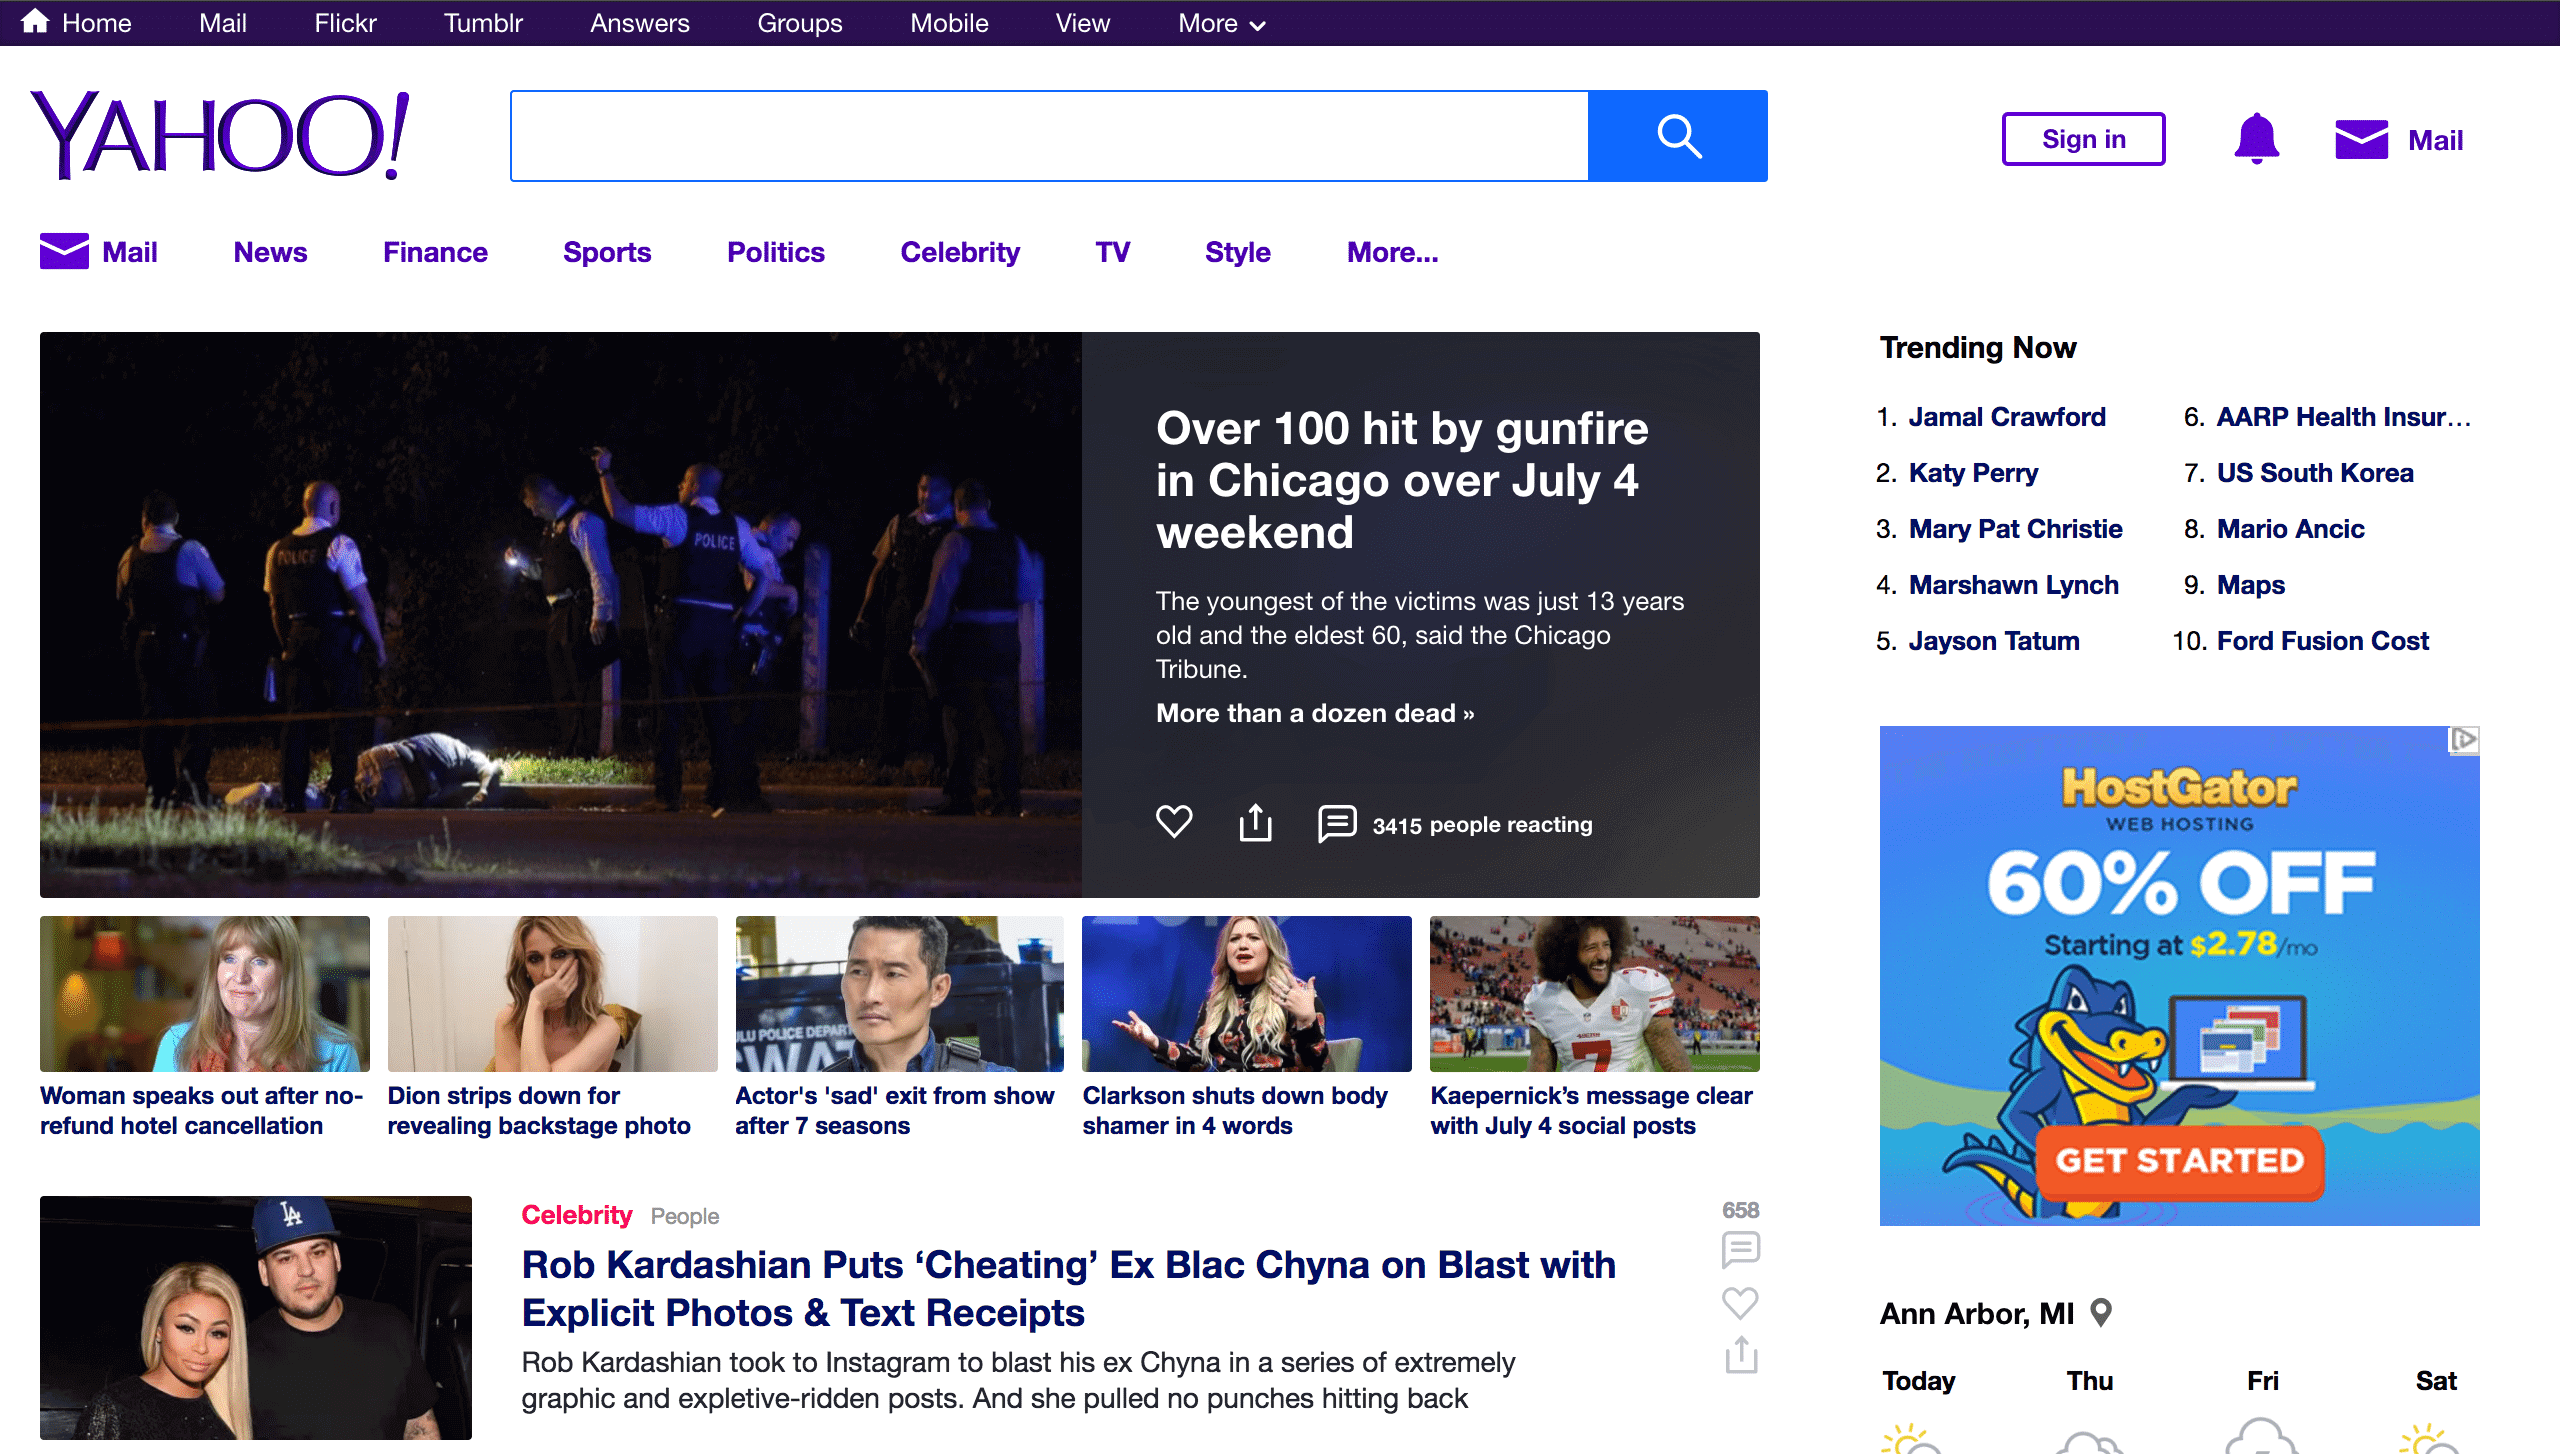 Yahoo! home page showing crowding and lack of white space